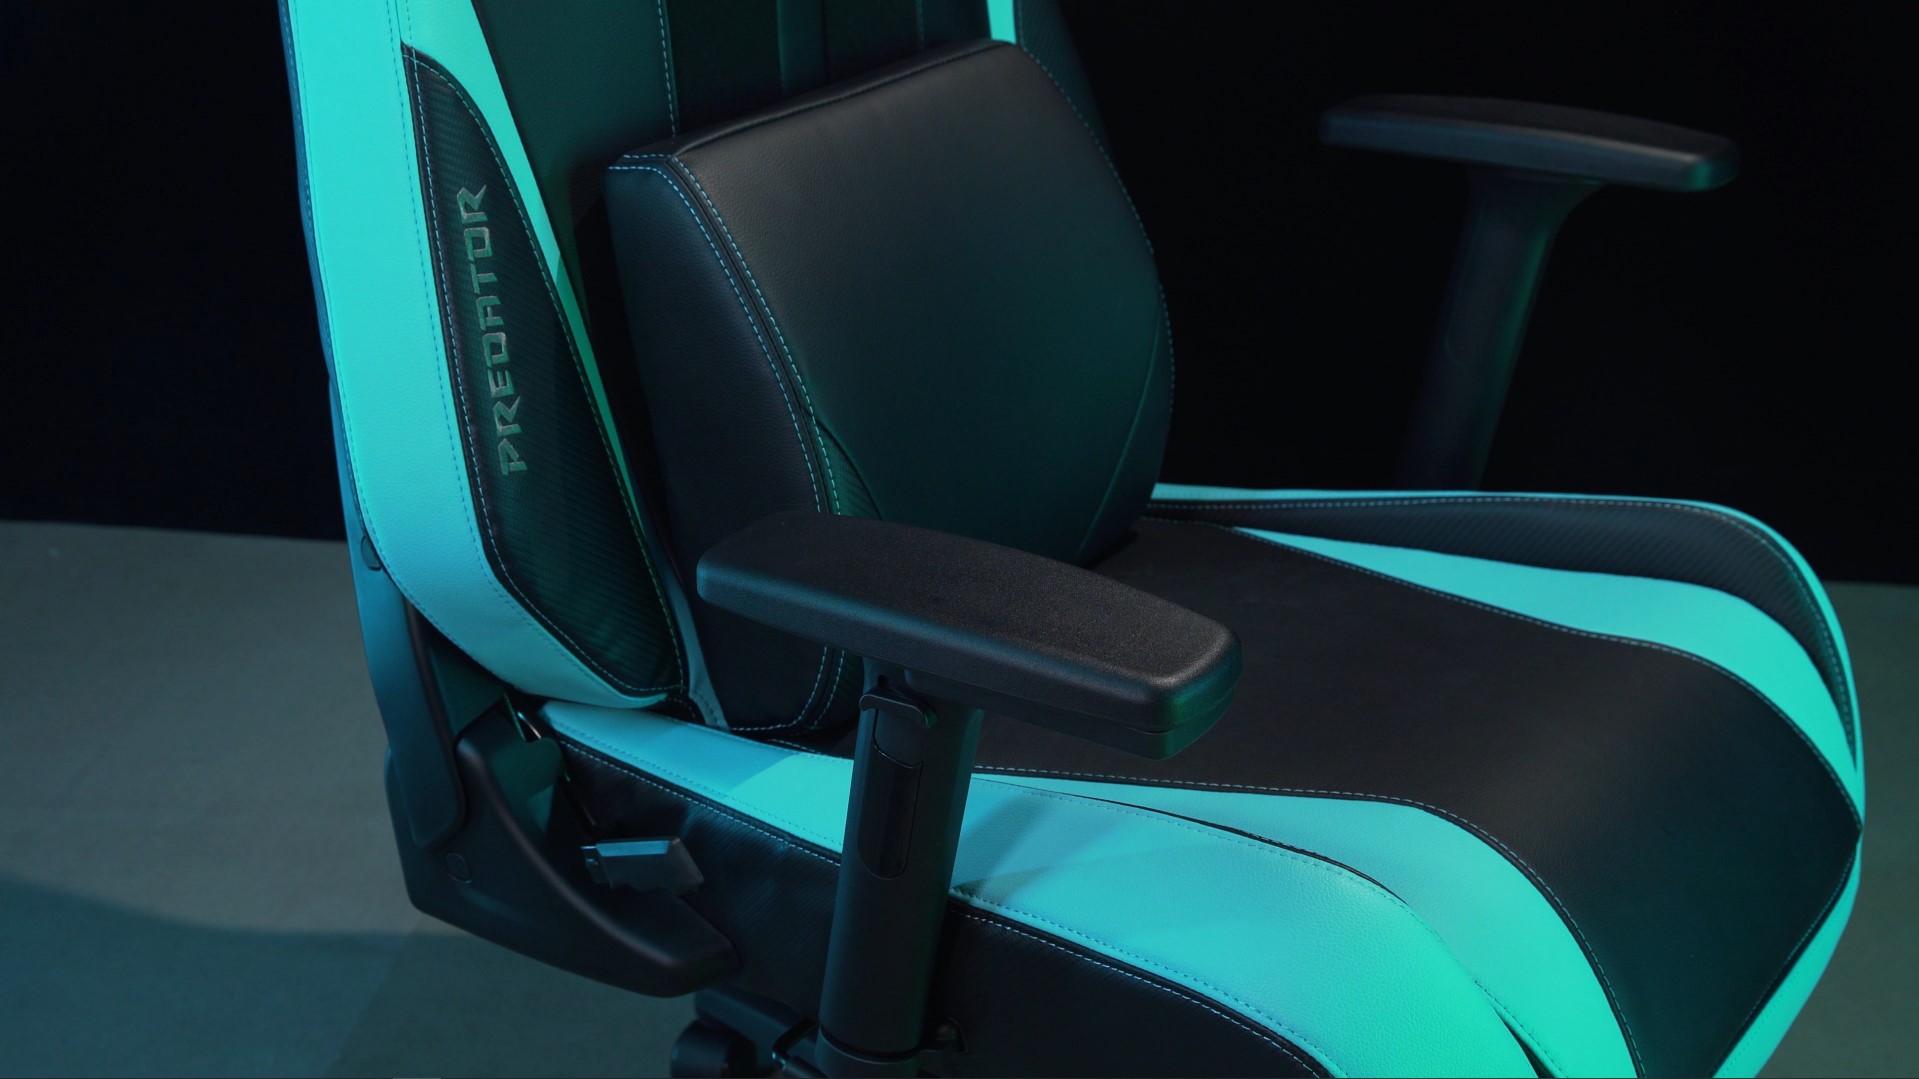  Acer  and Osim s new Predator  gaming chair  offers soothing 